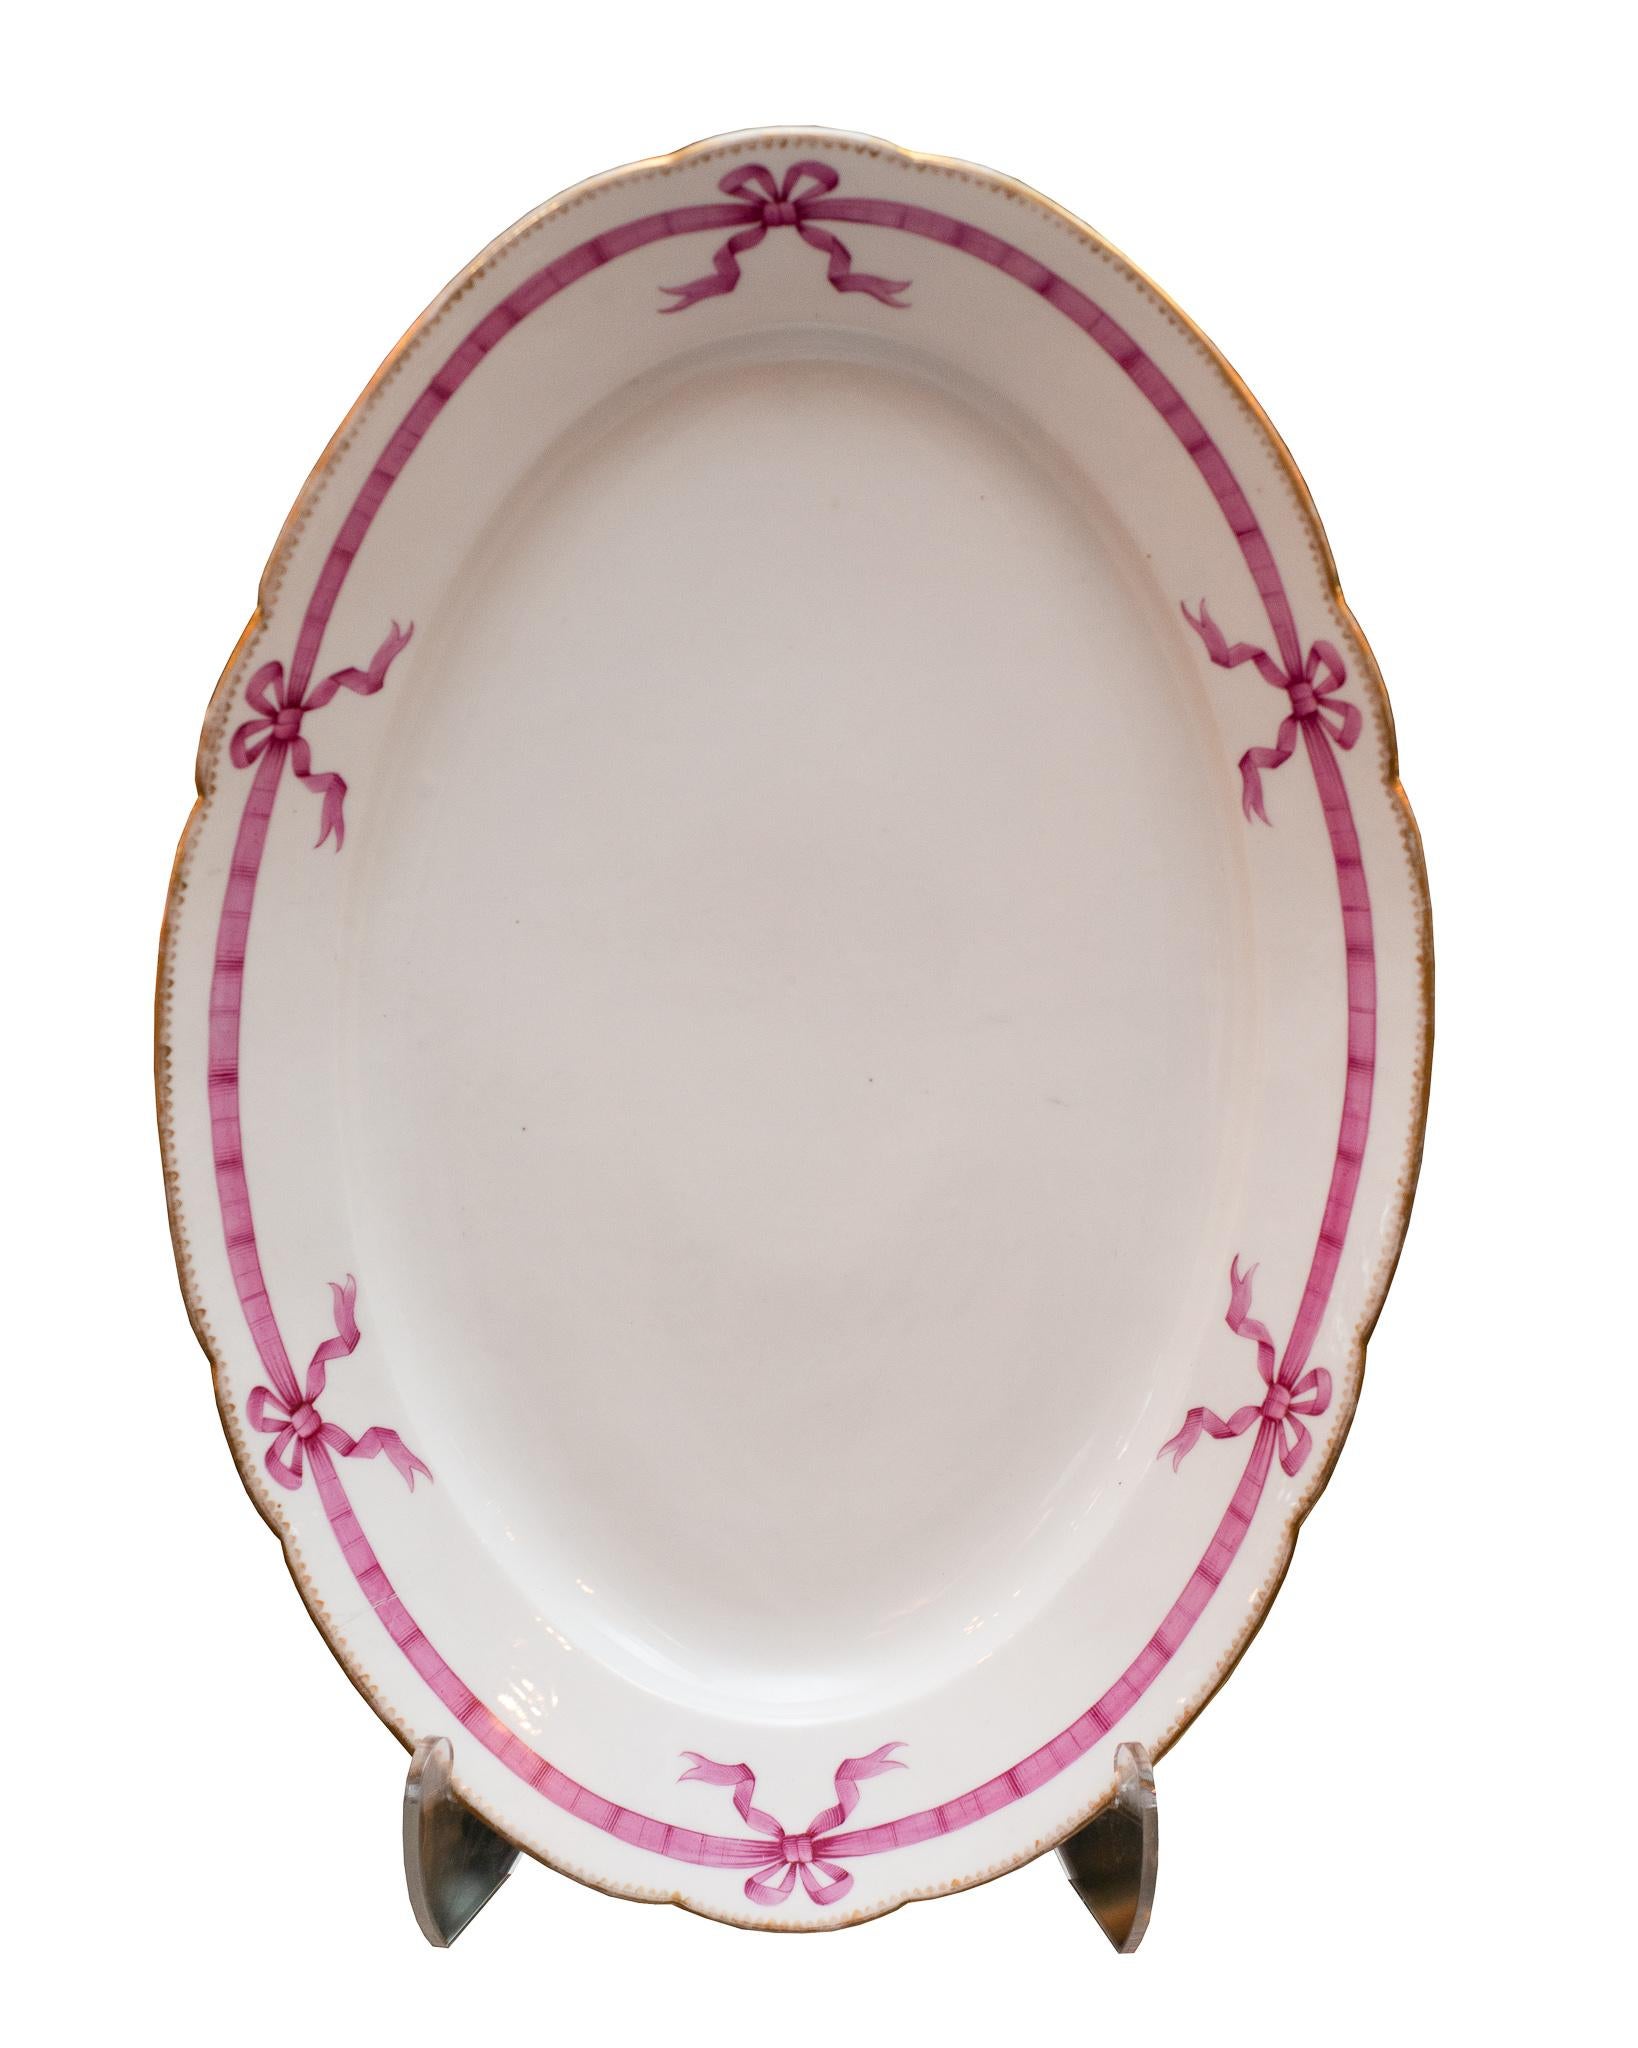 19th Century Antique French 22-Piece White Porcelain Dinner Set with Pink Ribbon Motif For Sale